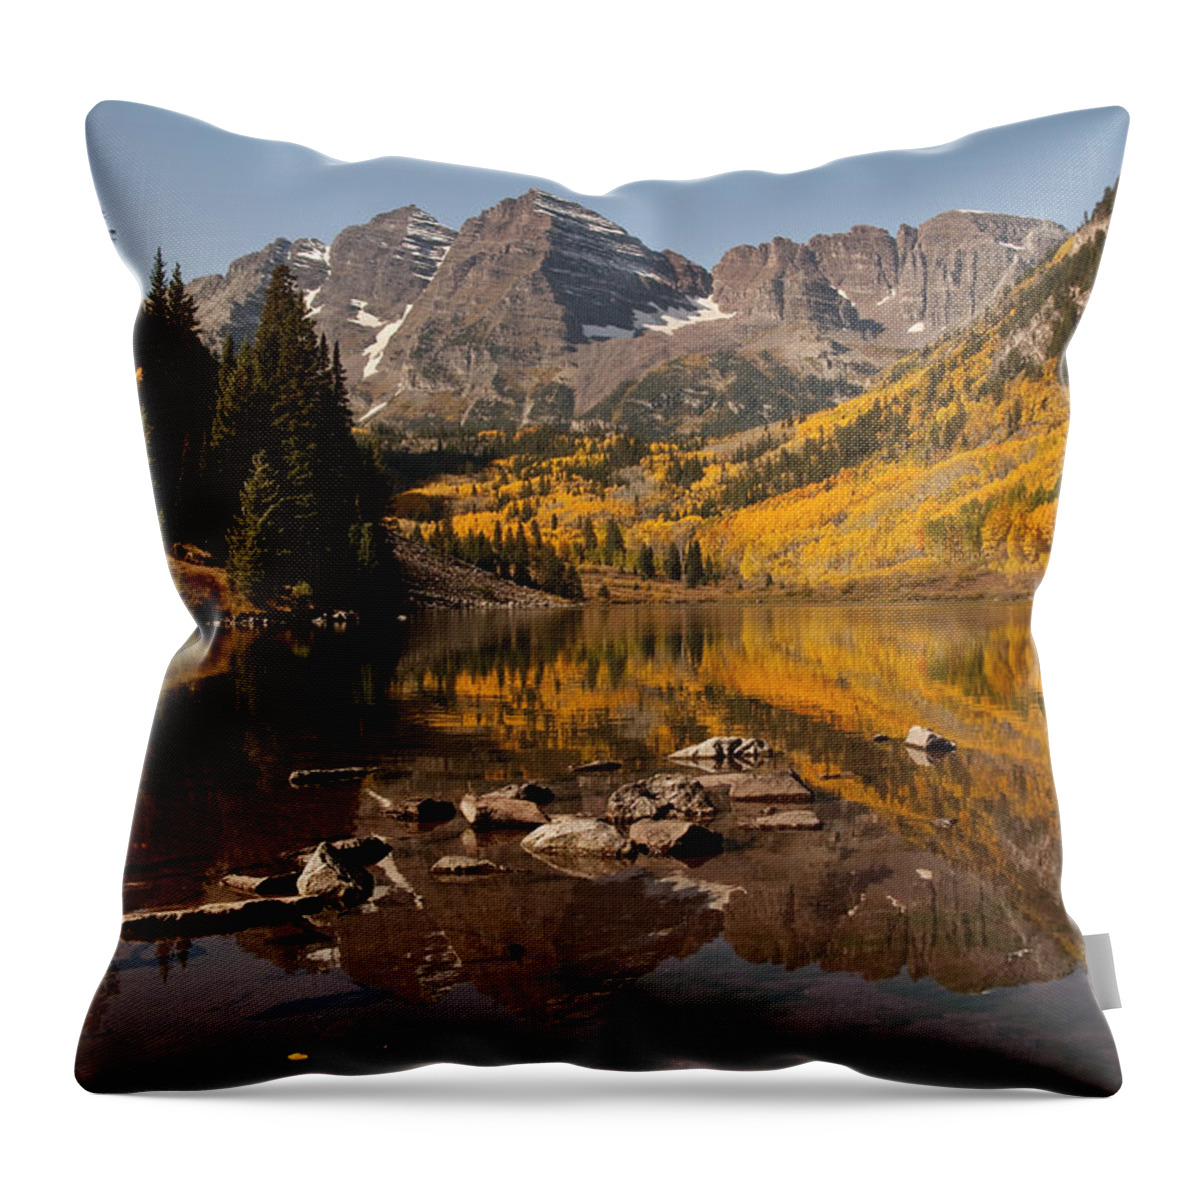 Photography Throw Pillow featuring the photograph Maroon Bells Reflection by Lee Kirchhevel